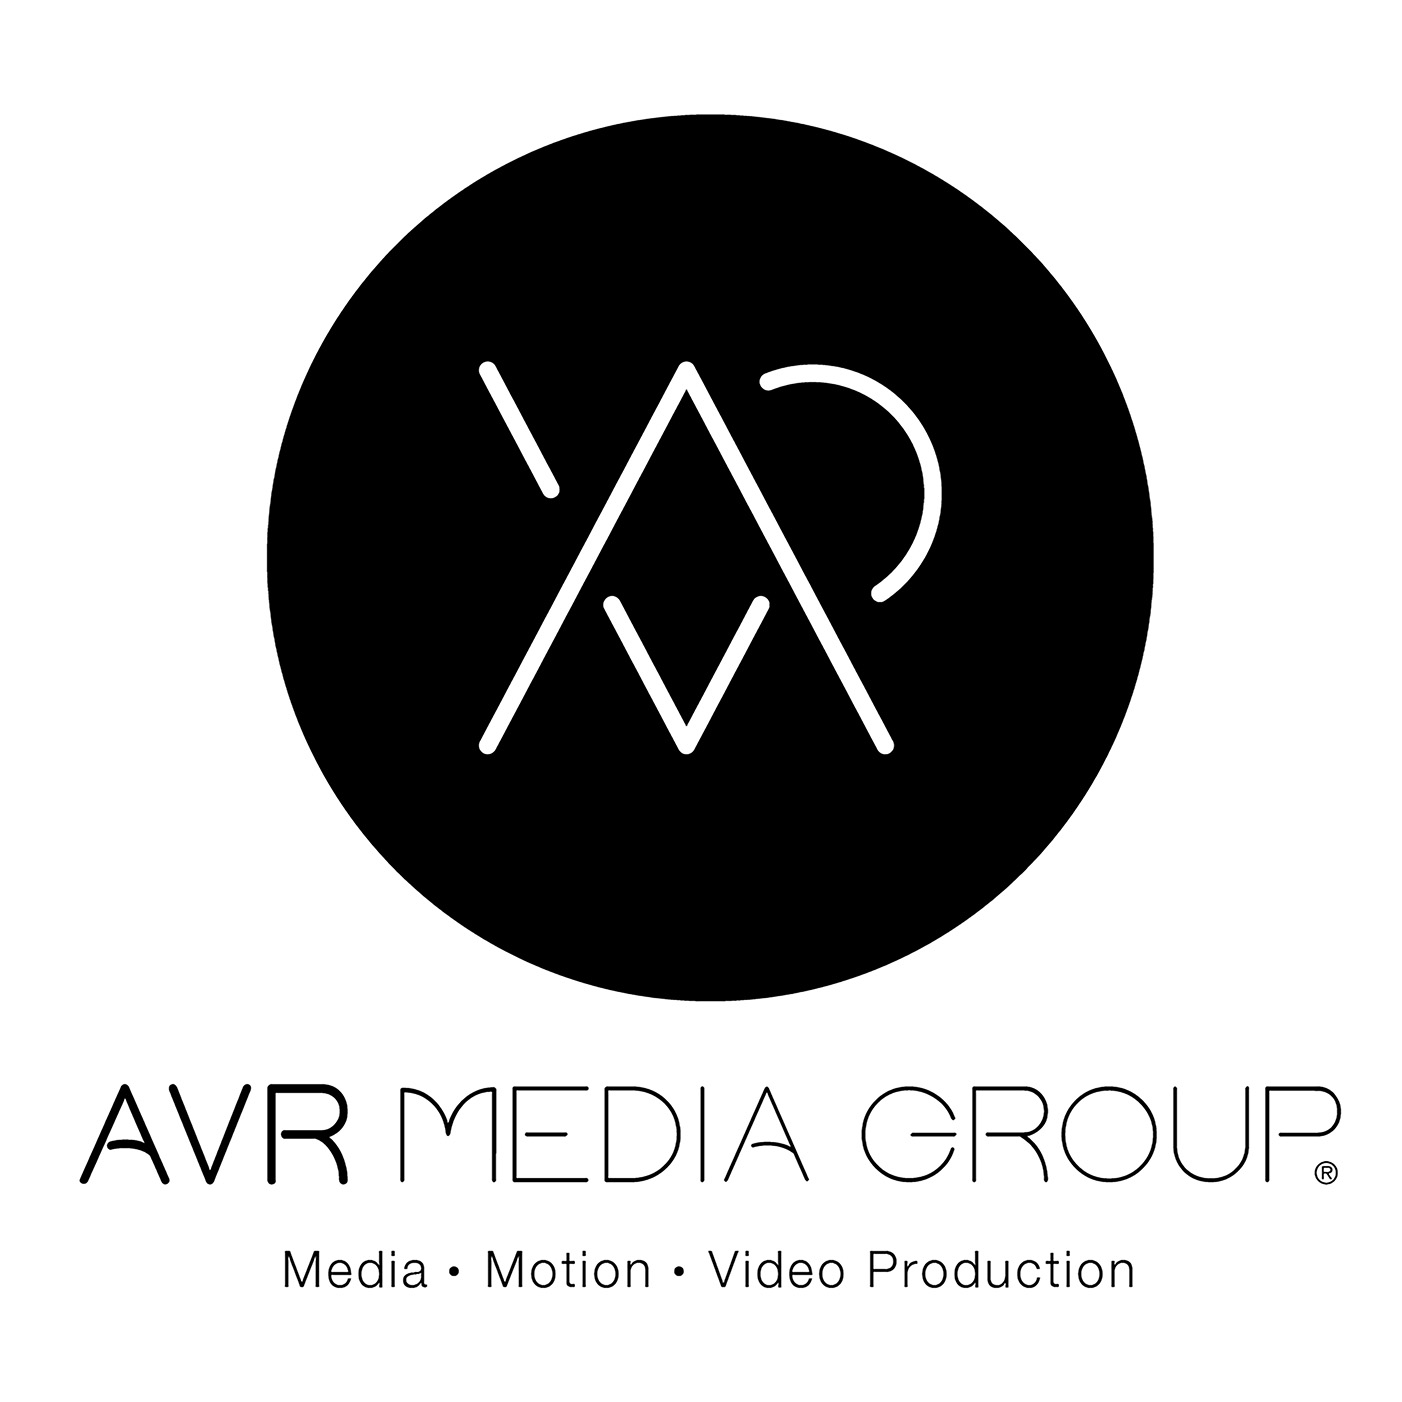 AVR Media Group is Proud to be in the 0.1% of Woman-founded Video Companies